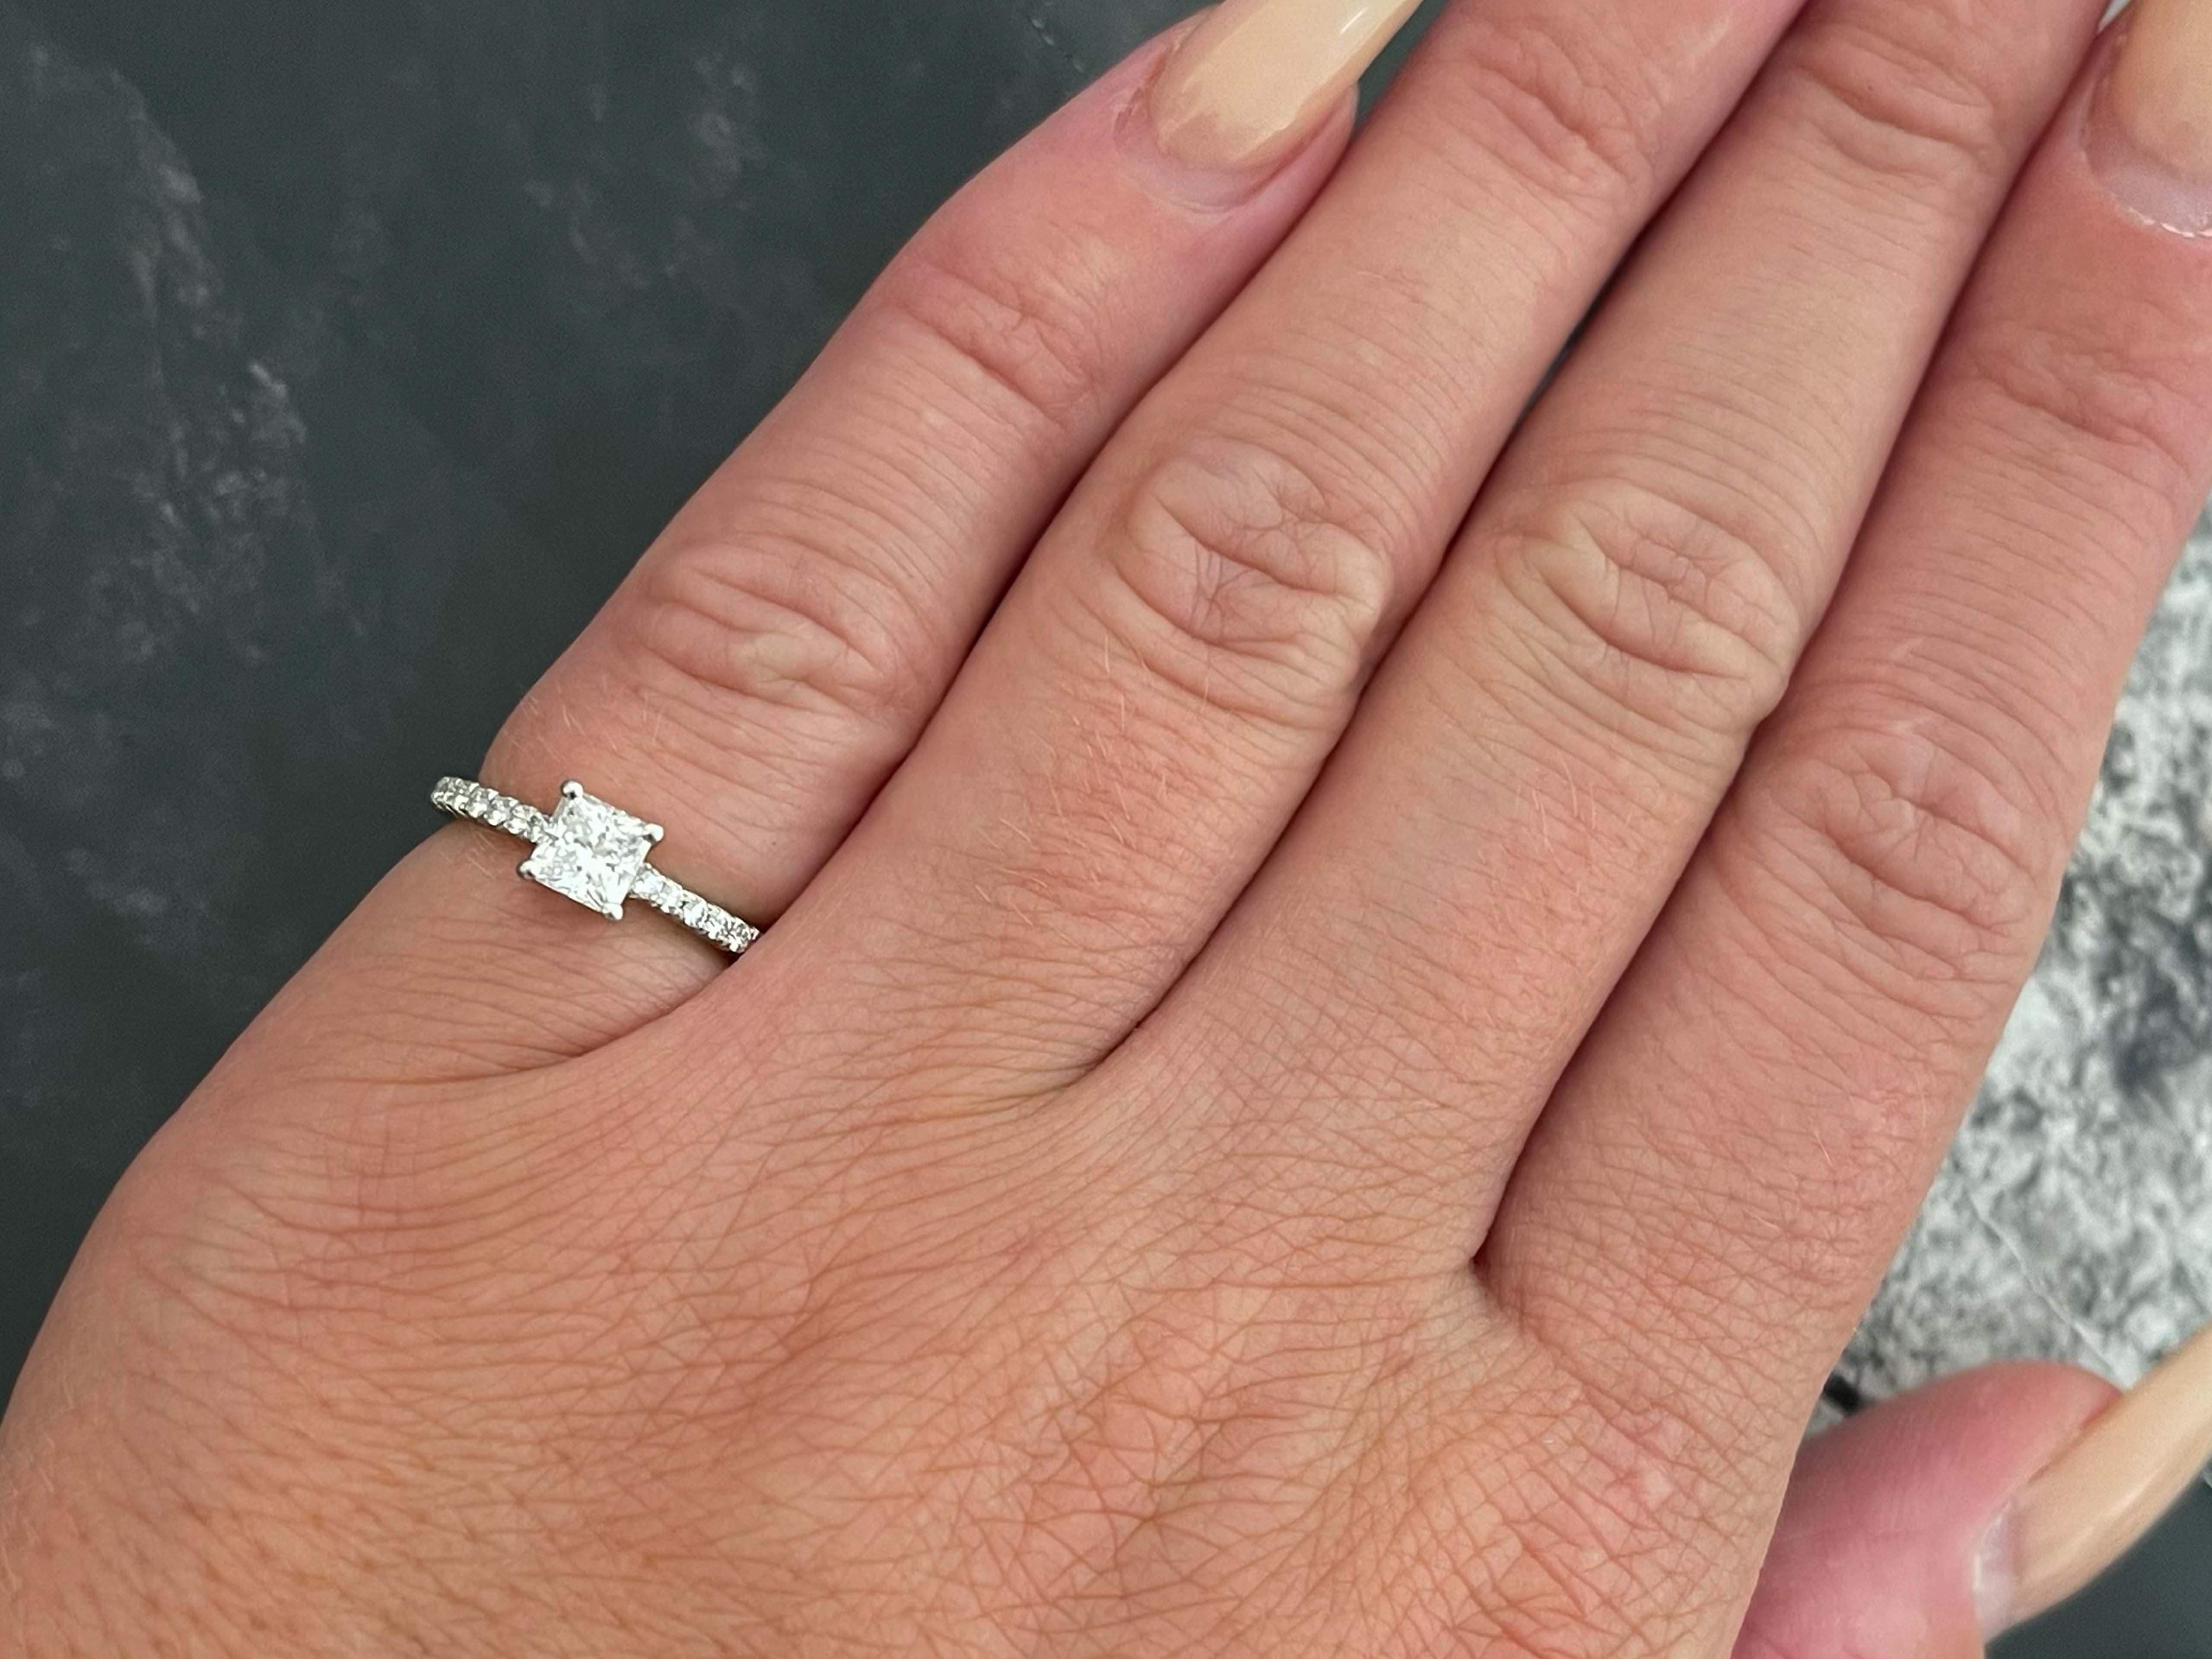 100% Authentic Tiffany & Co. novo princess cut engagement ring with a 0.51 carat excellent cut diamond center, the diamond color grade is G, and clarity is VVS1. The diamond is set in 4 prongs and has a pave diamond platinum band. The ring comes